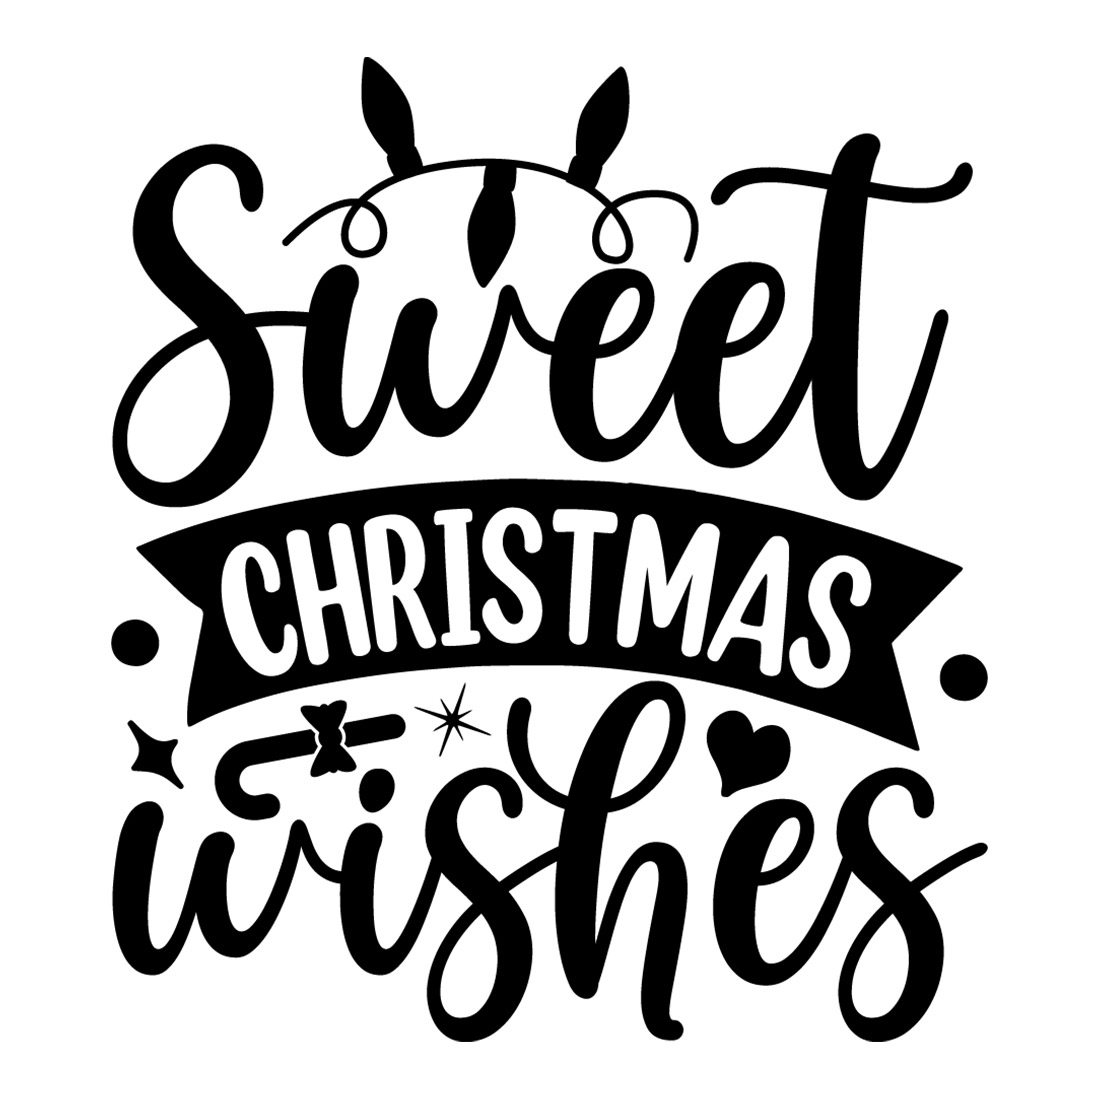 Sweet Christmas wishes preview image.